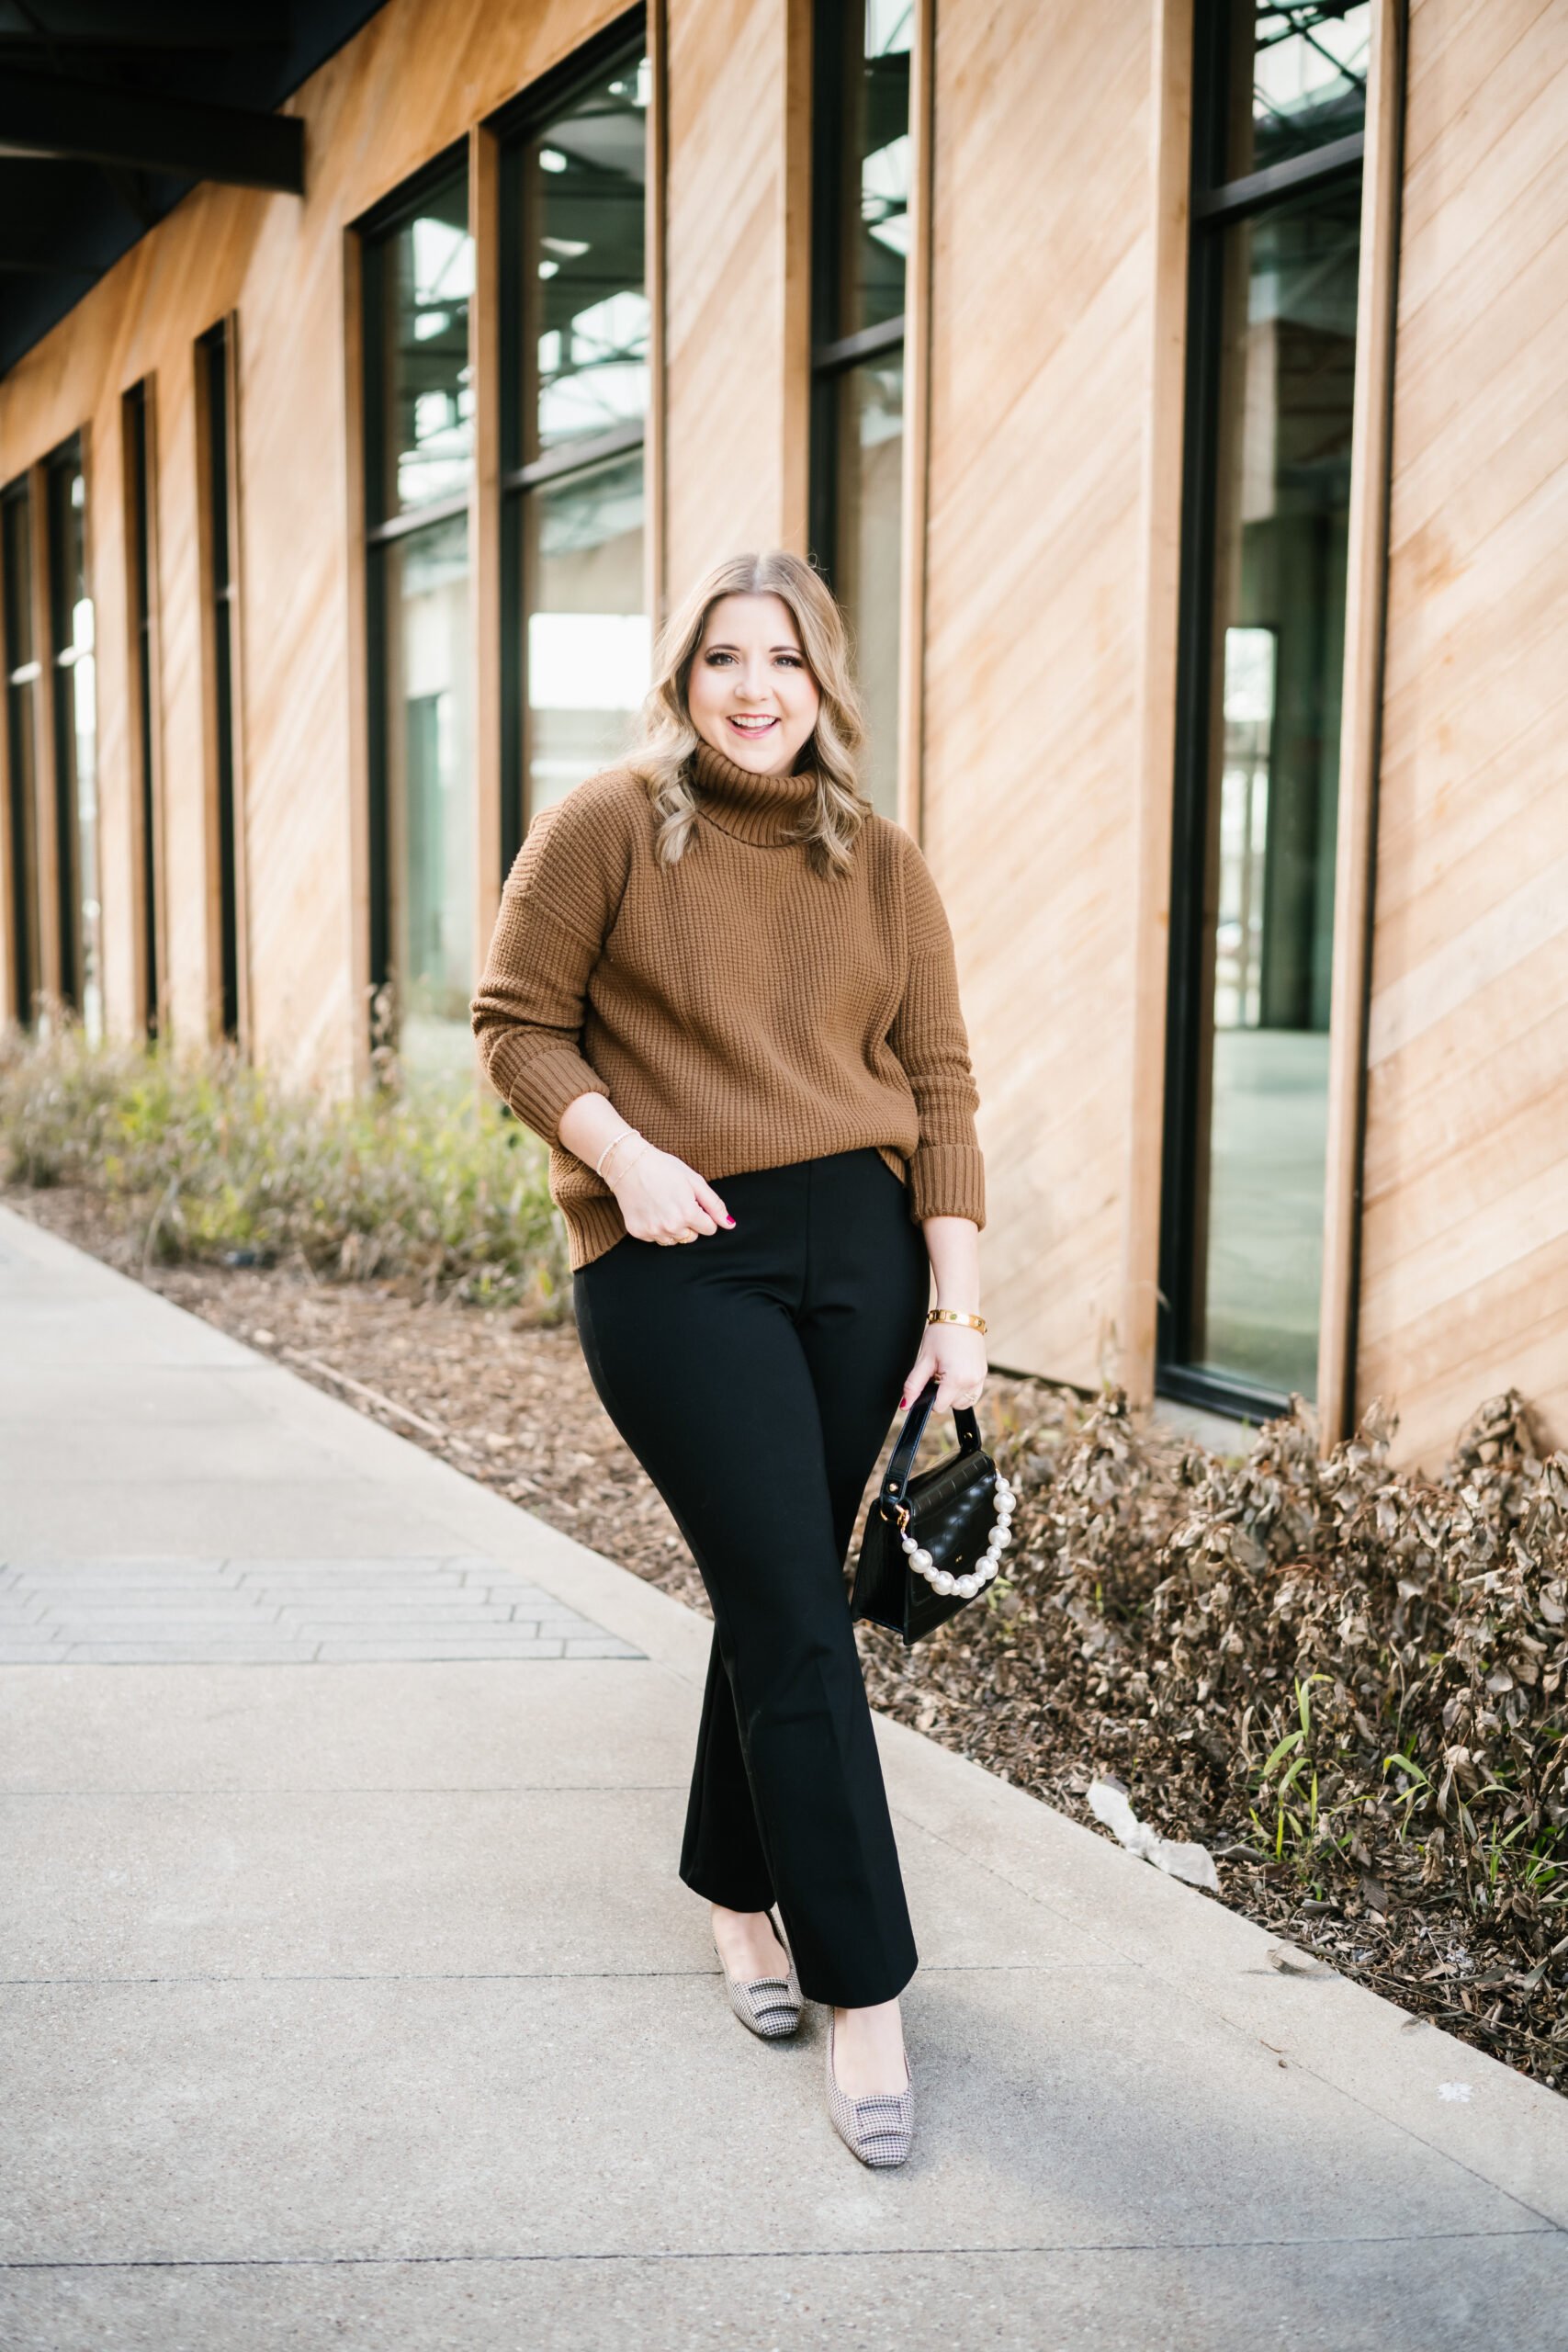 Winter Workwear Outfit Inspiration: Classic Comfort and Style